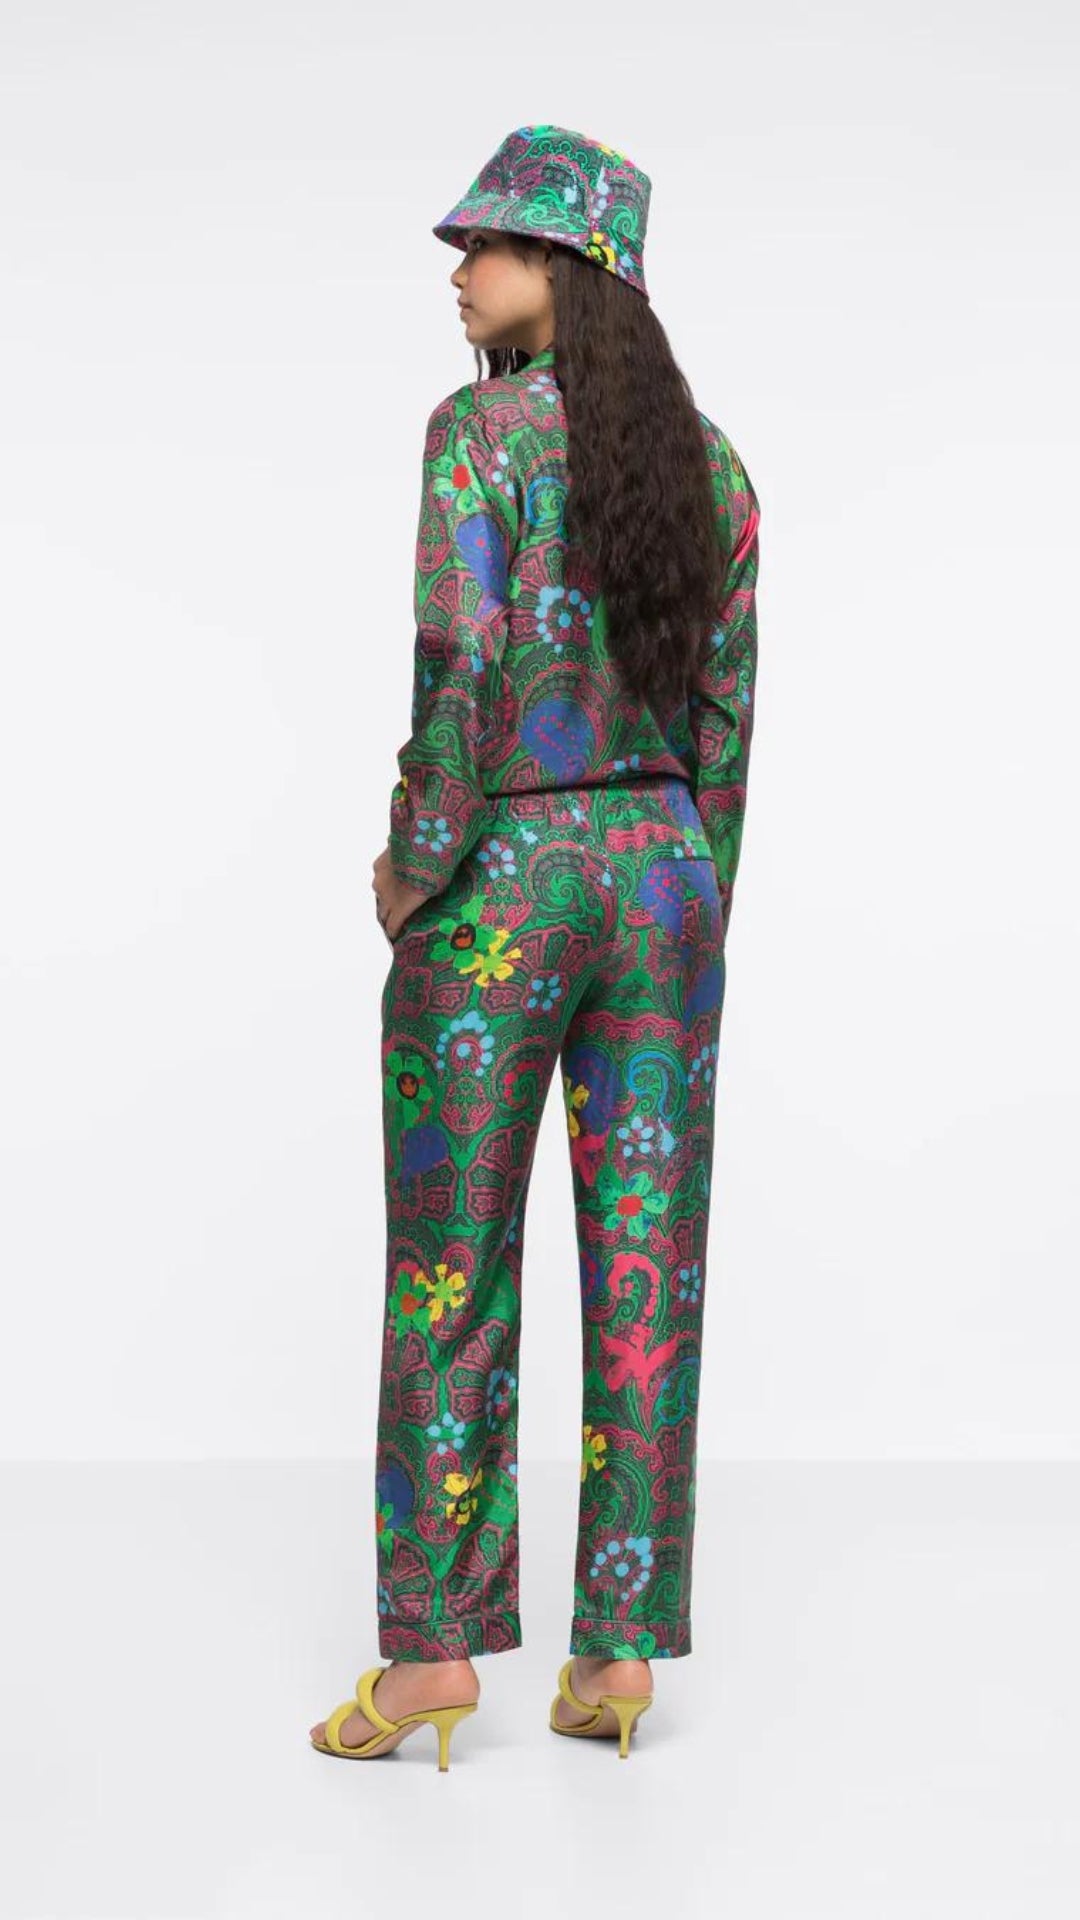 AZ Factory Silk Trousers in Motly Paisley. Pajama style silk pants made in Italy. Featuring a colorful motly paisley print with Alber Ebaz sketches. Shown on model facing back.